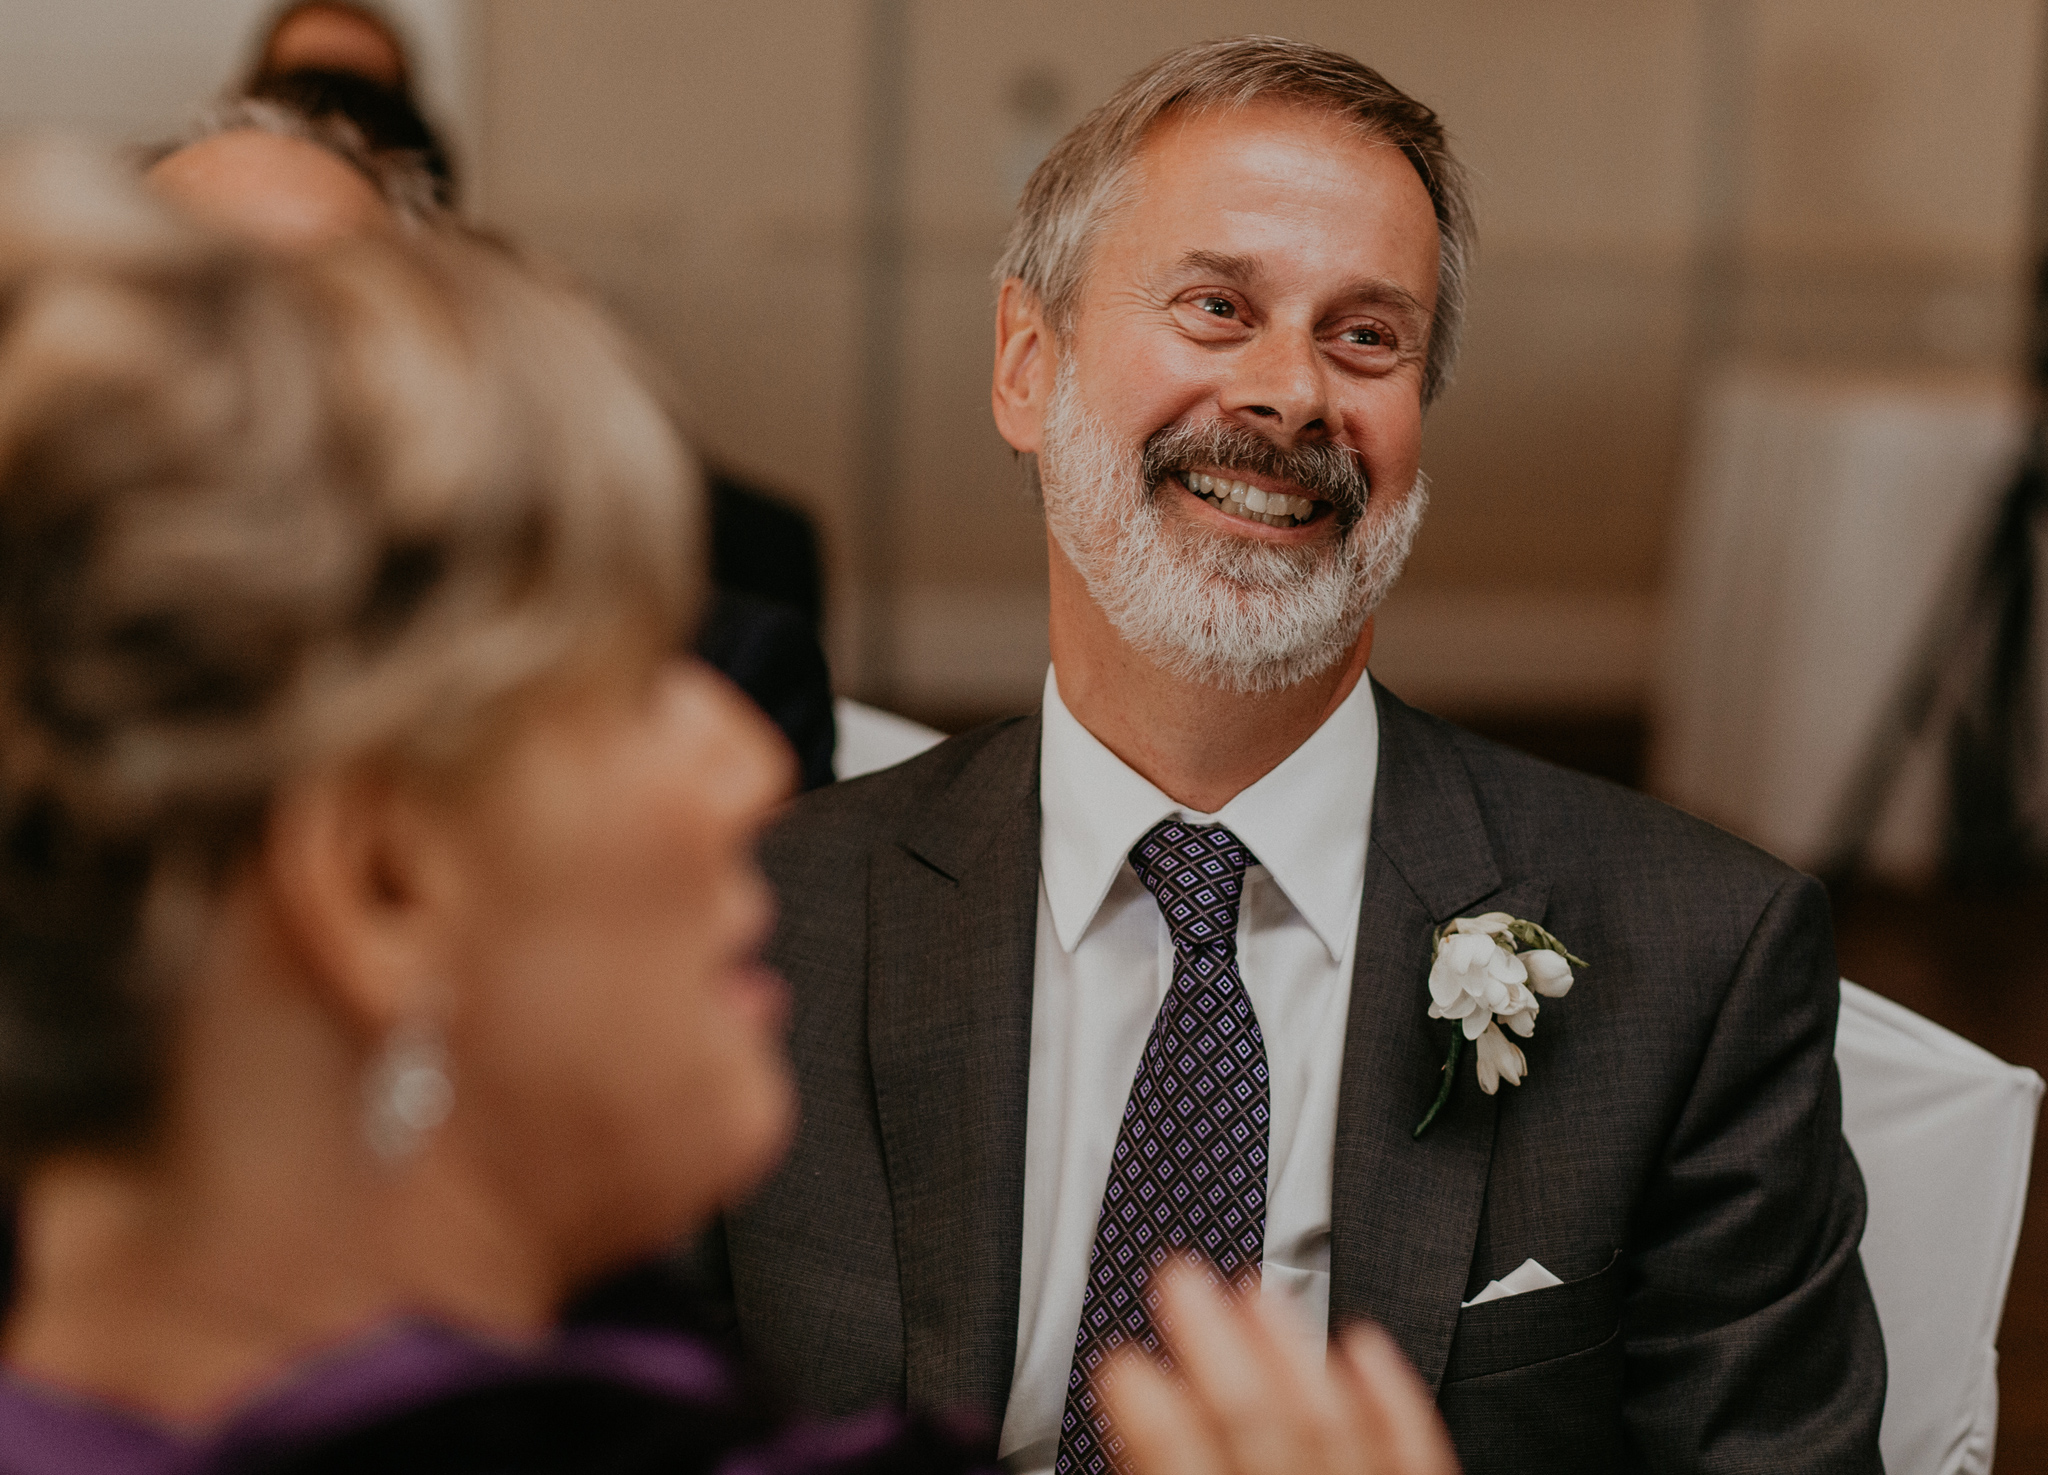 Father laughs during wedding reception for bride and groom in candid photo